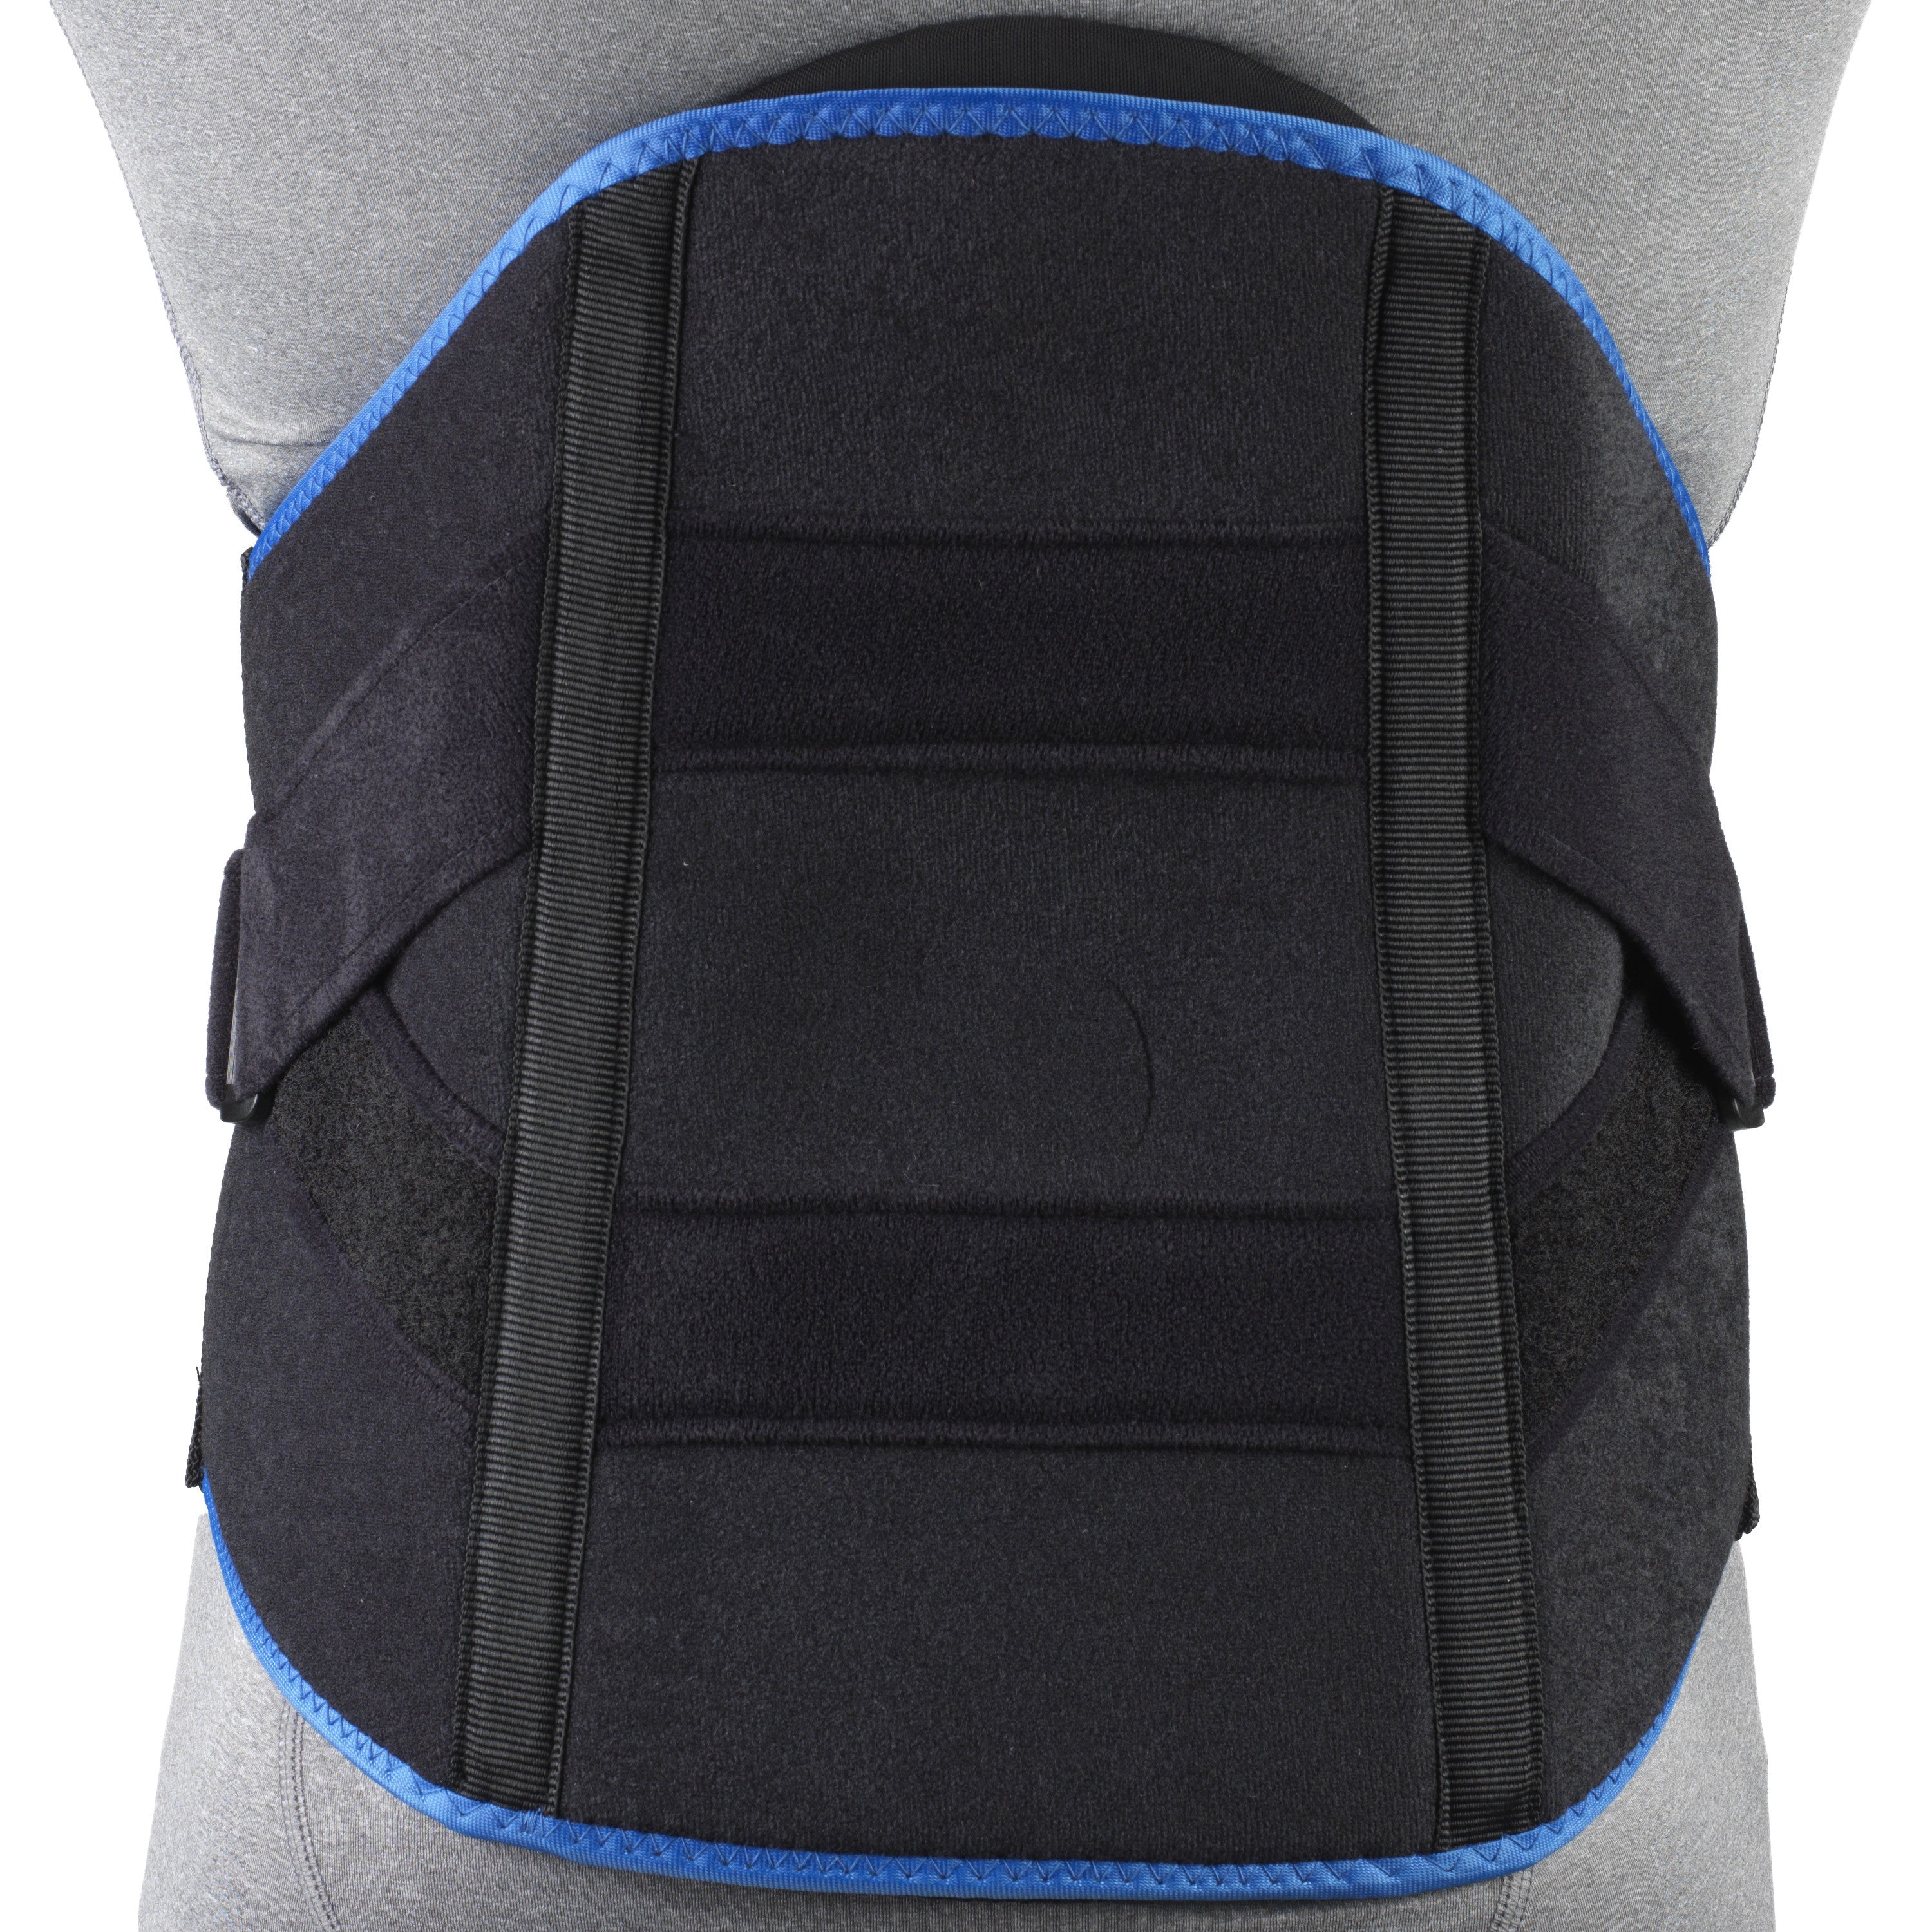 LordoLoc® Back Brace, Supports and orthoses